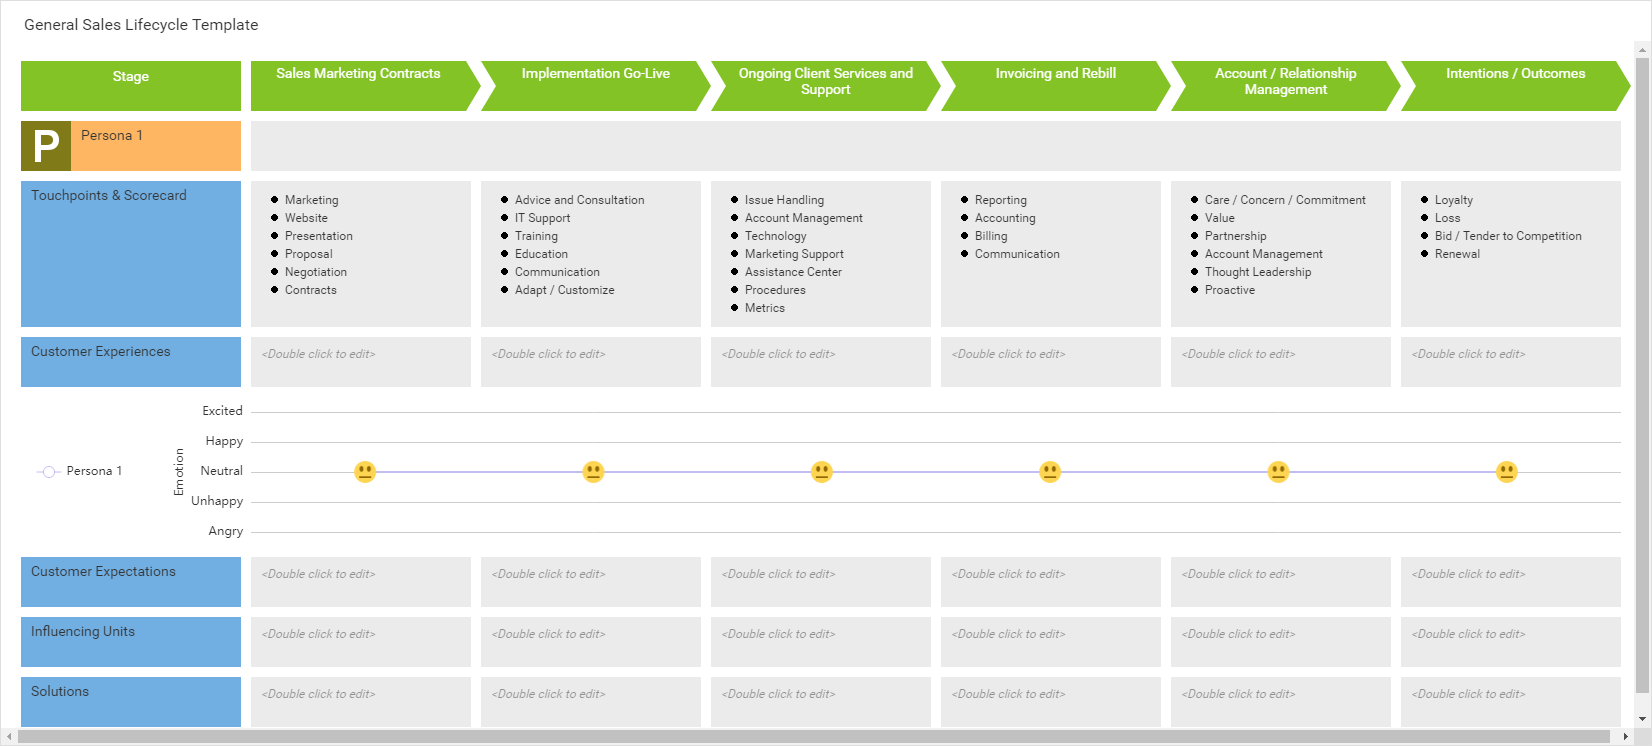 General Sales Lifecycle Template